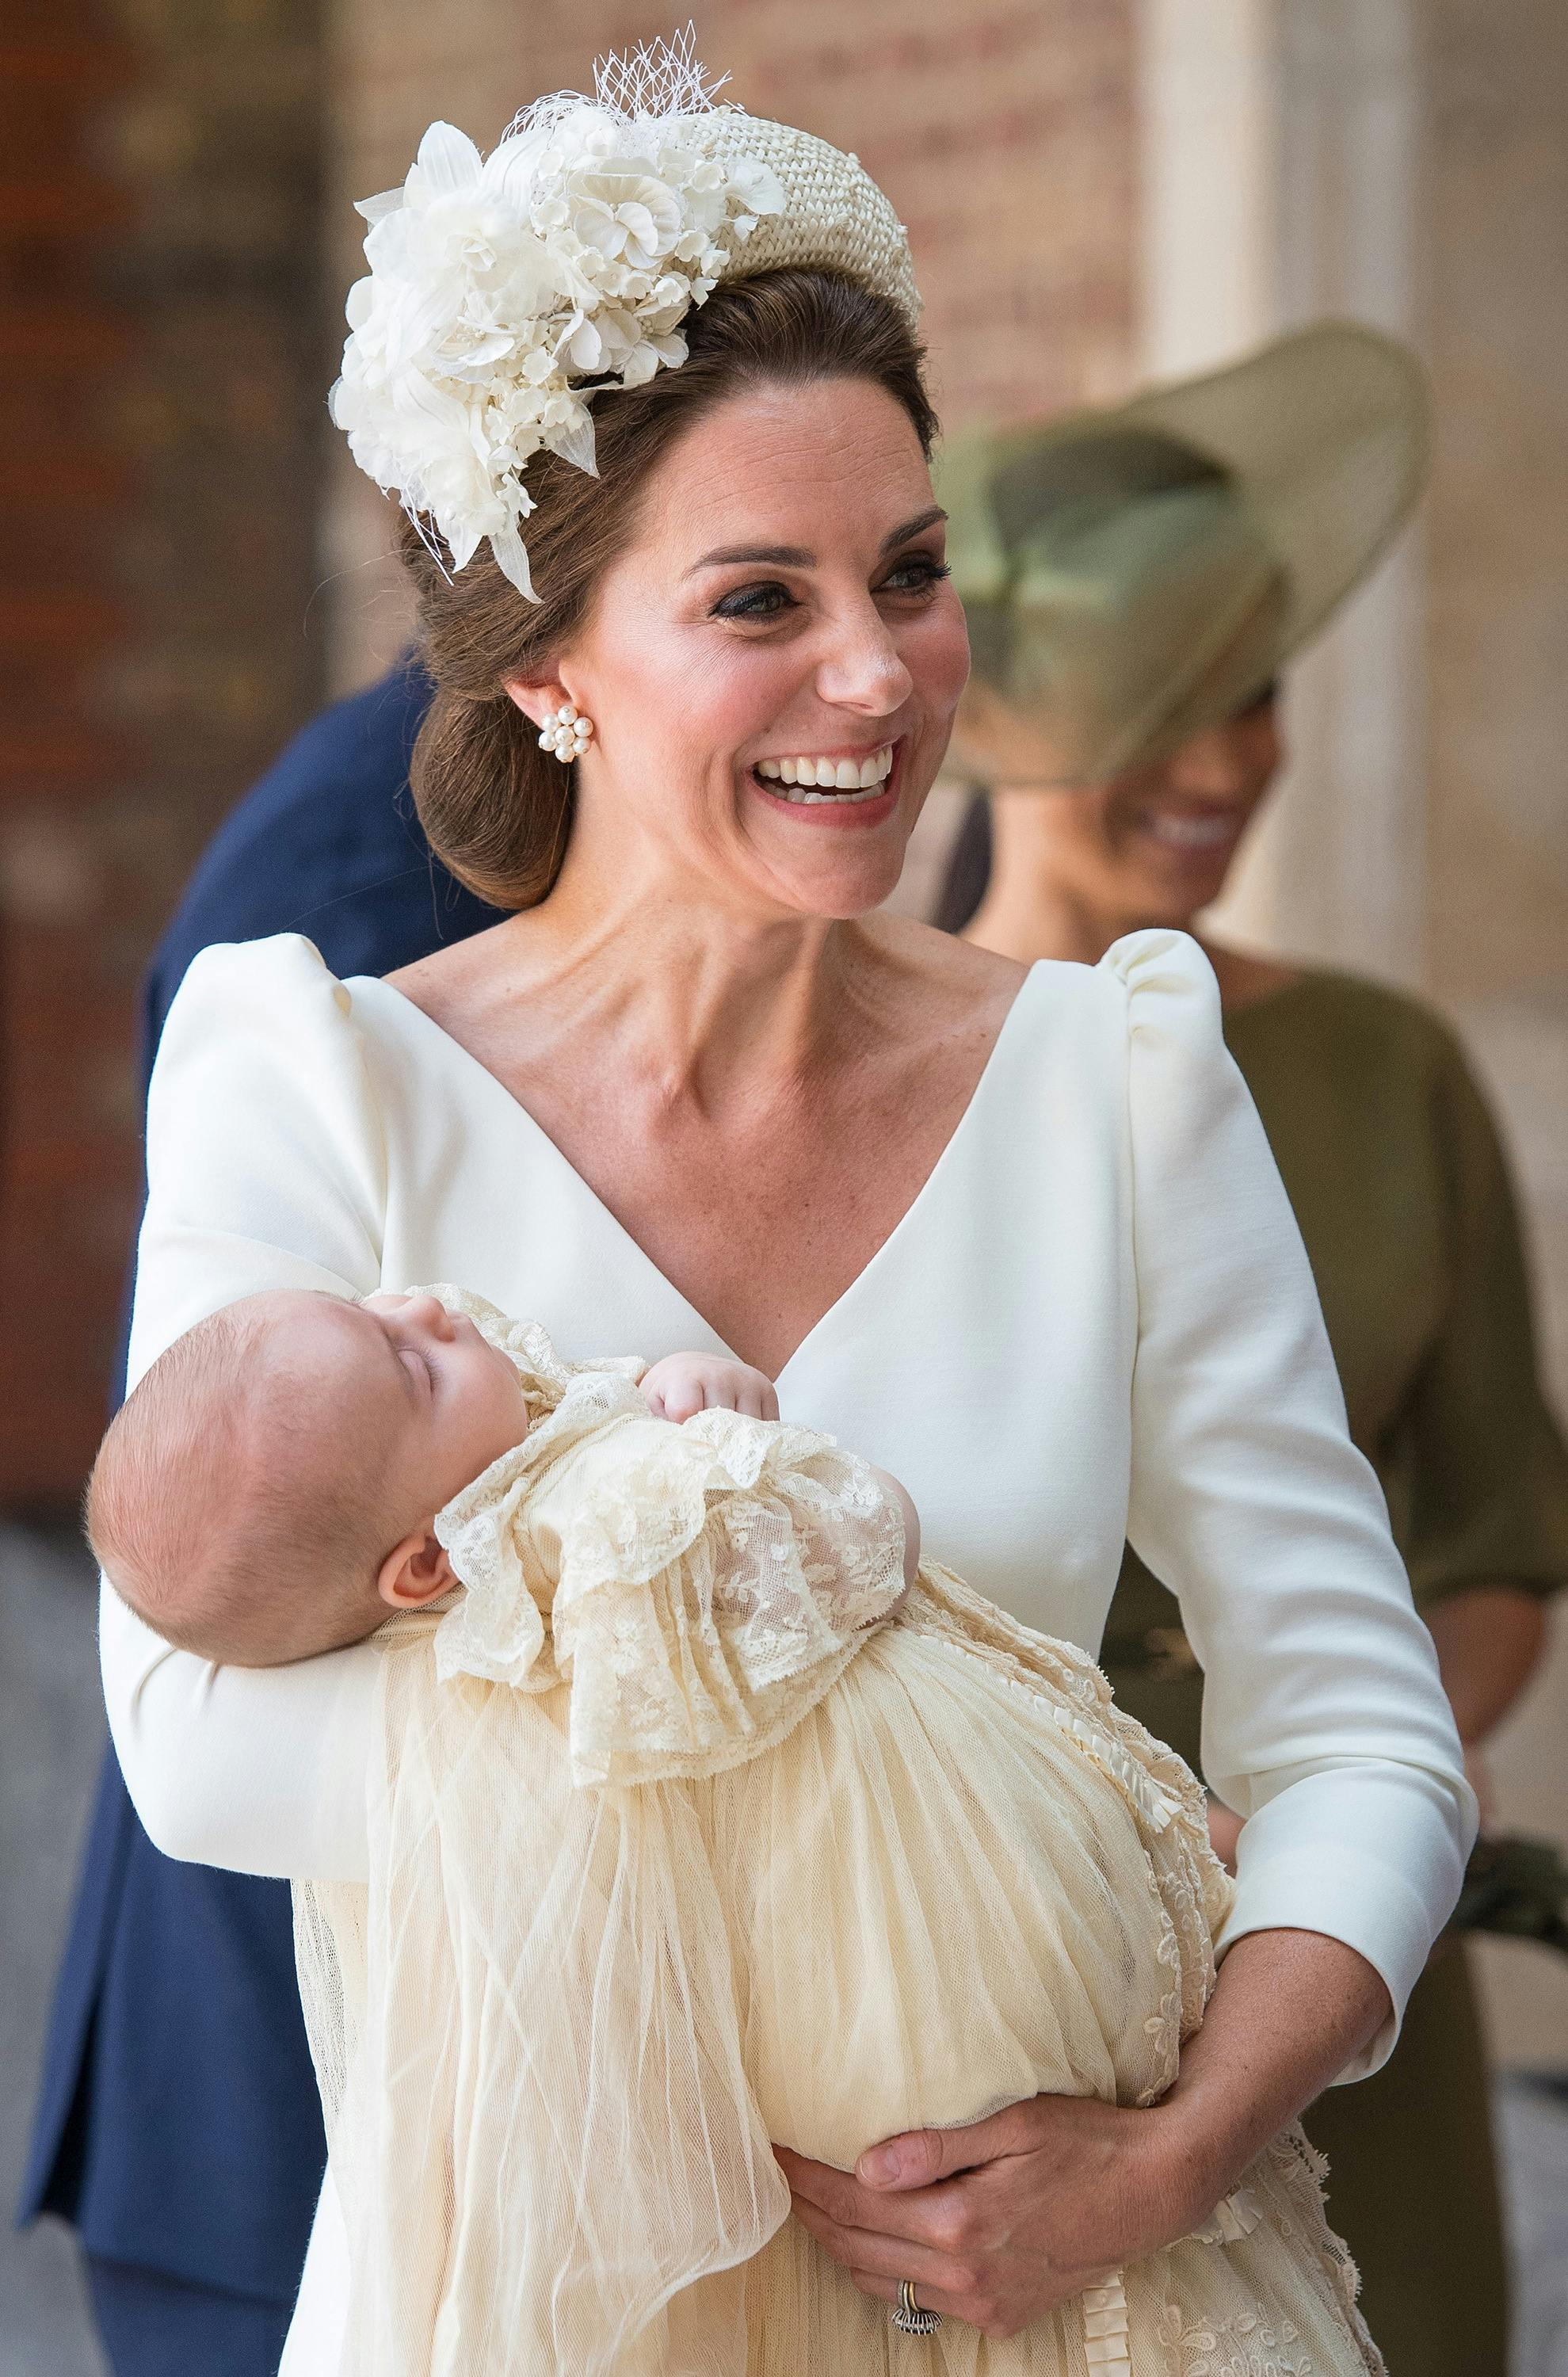 Members of The Royal Family attend the Christening of Prince Louis at the Chapel Royal, St. James's Palace, London, UK, on the 9th July 2018. Picture by Dominic Lipinski/WPA-Pool. 09 Jul 2018 Pictured: Prince Louis, Catherine, Duchess of Cambridge, Kate Middleton. Photo credit: MEGA TheMegaAgency.com +1 888 505 6342 (Mega Agency TagID: MEGA250143_005.jpg) [Photo via Mega Agency]